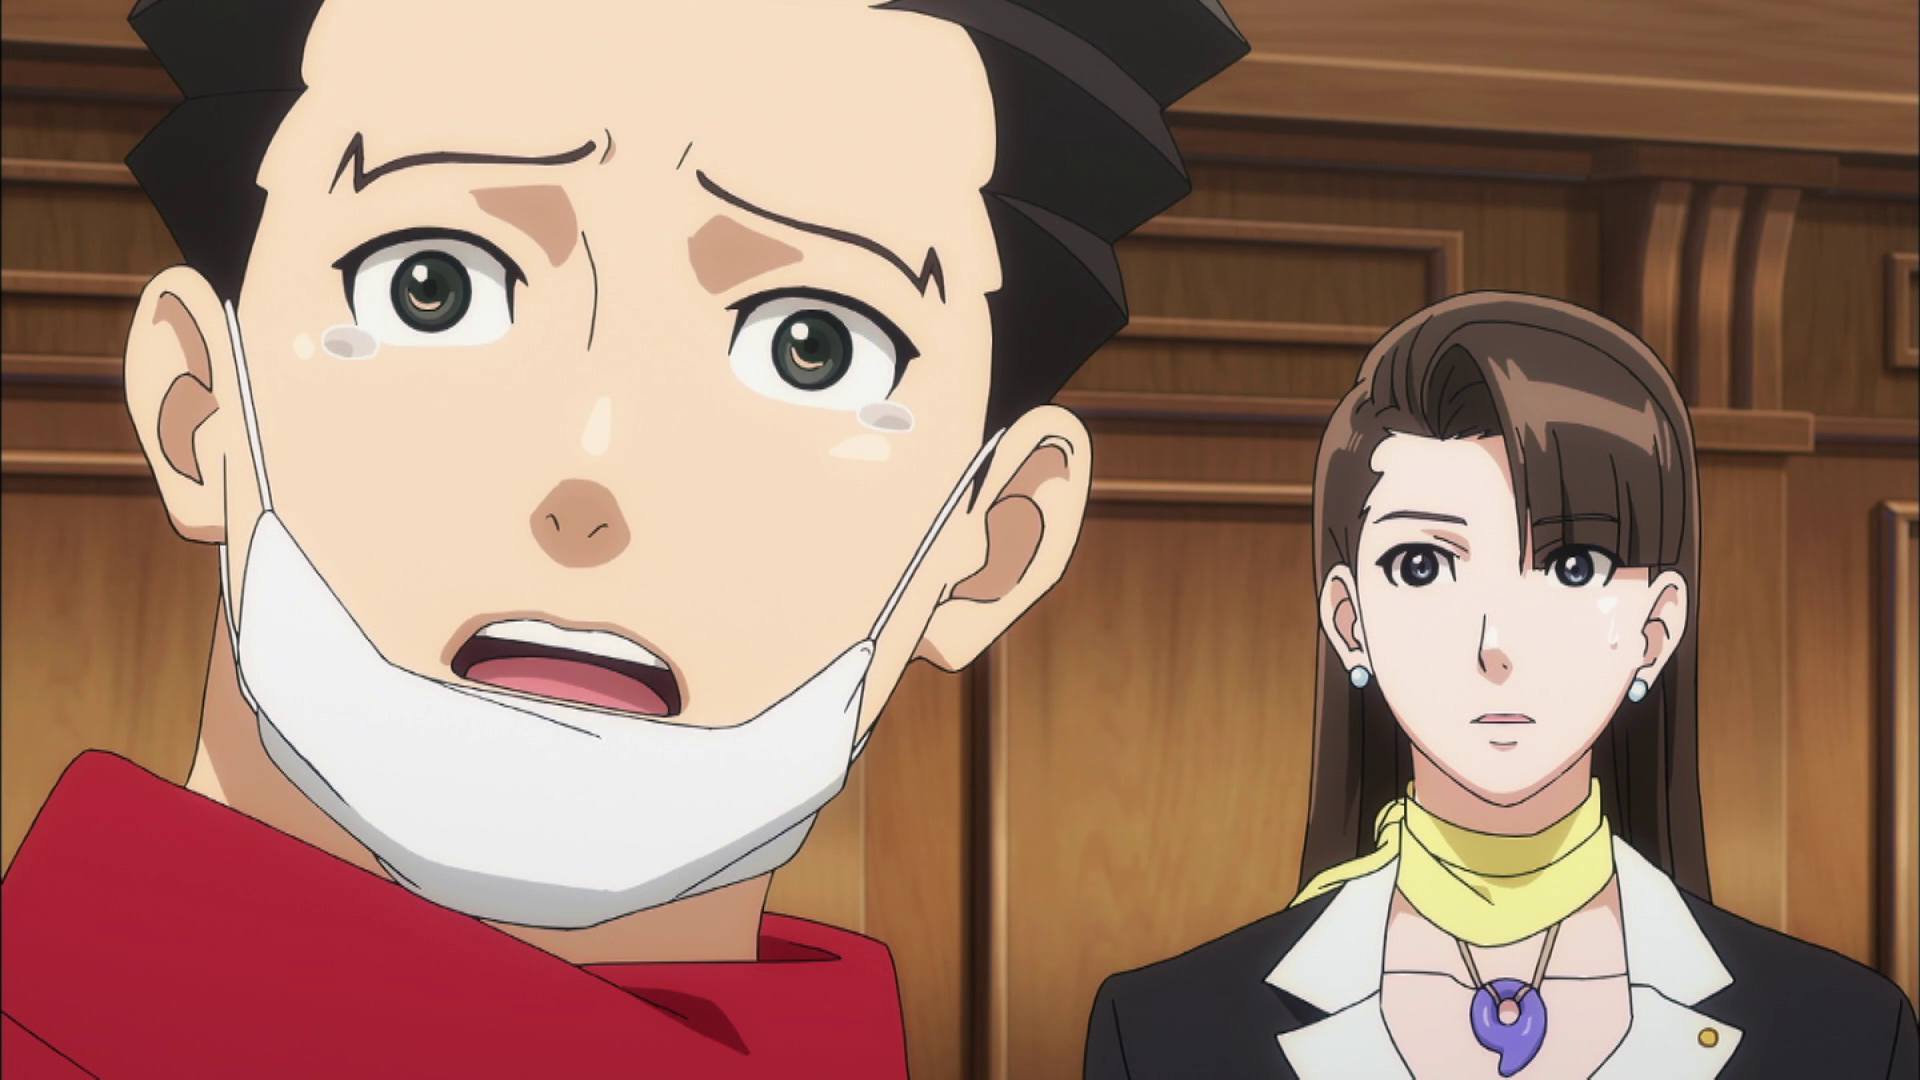 The Entire Ace Attorney Anime in One Image  rAceAttorney